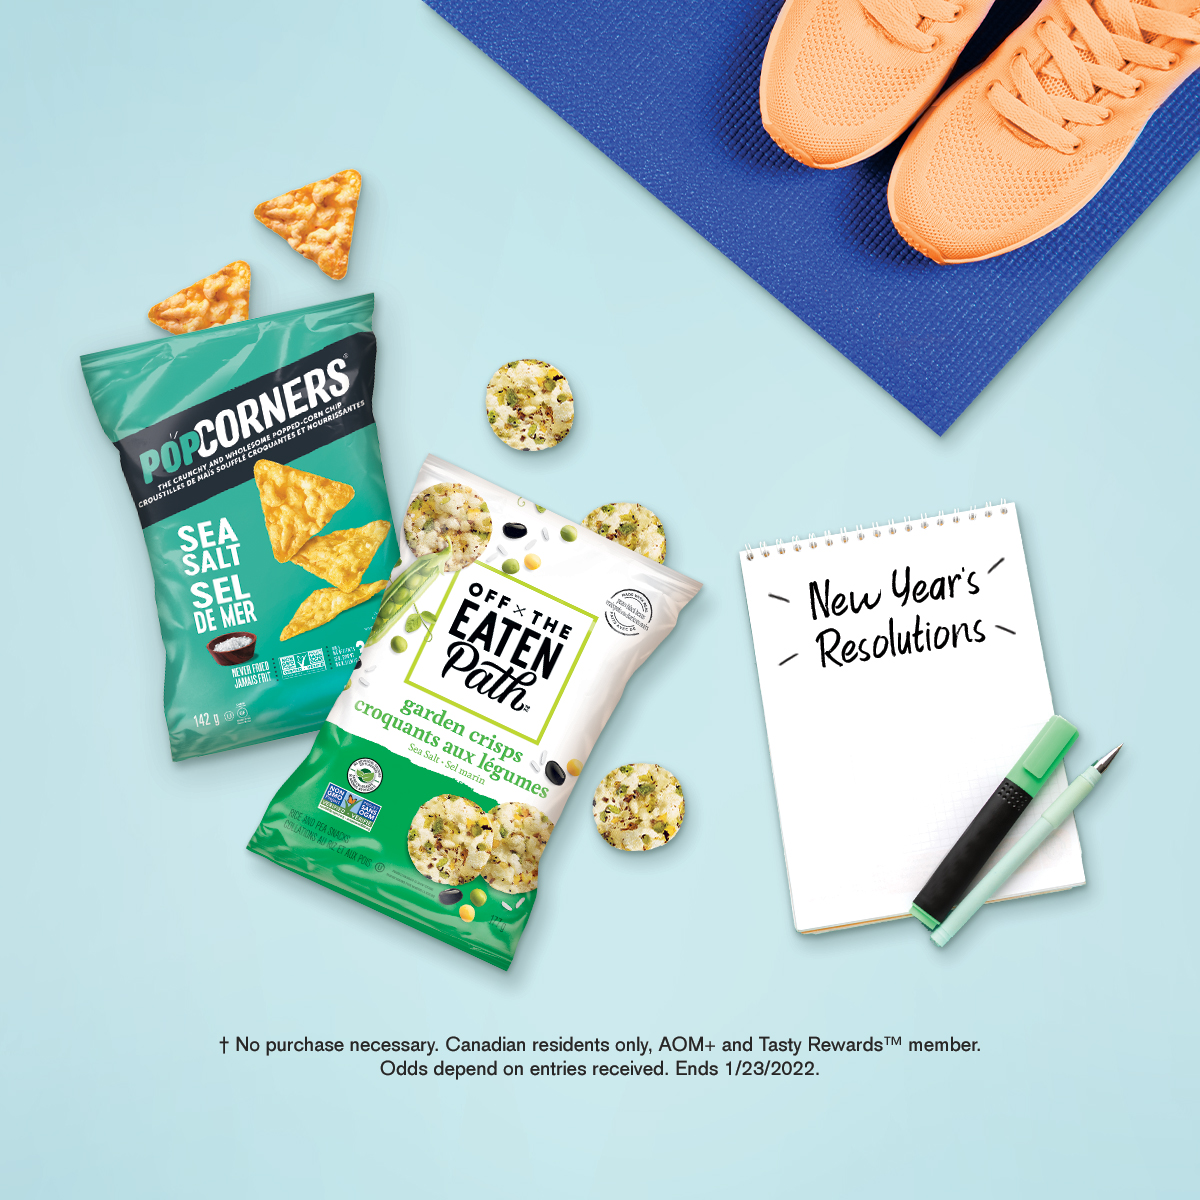 Feel Good Snacking Contest